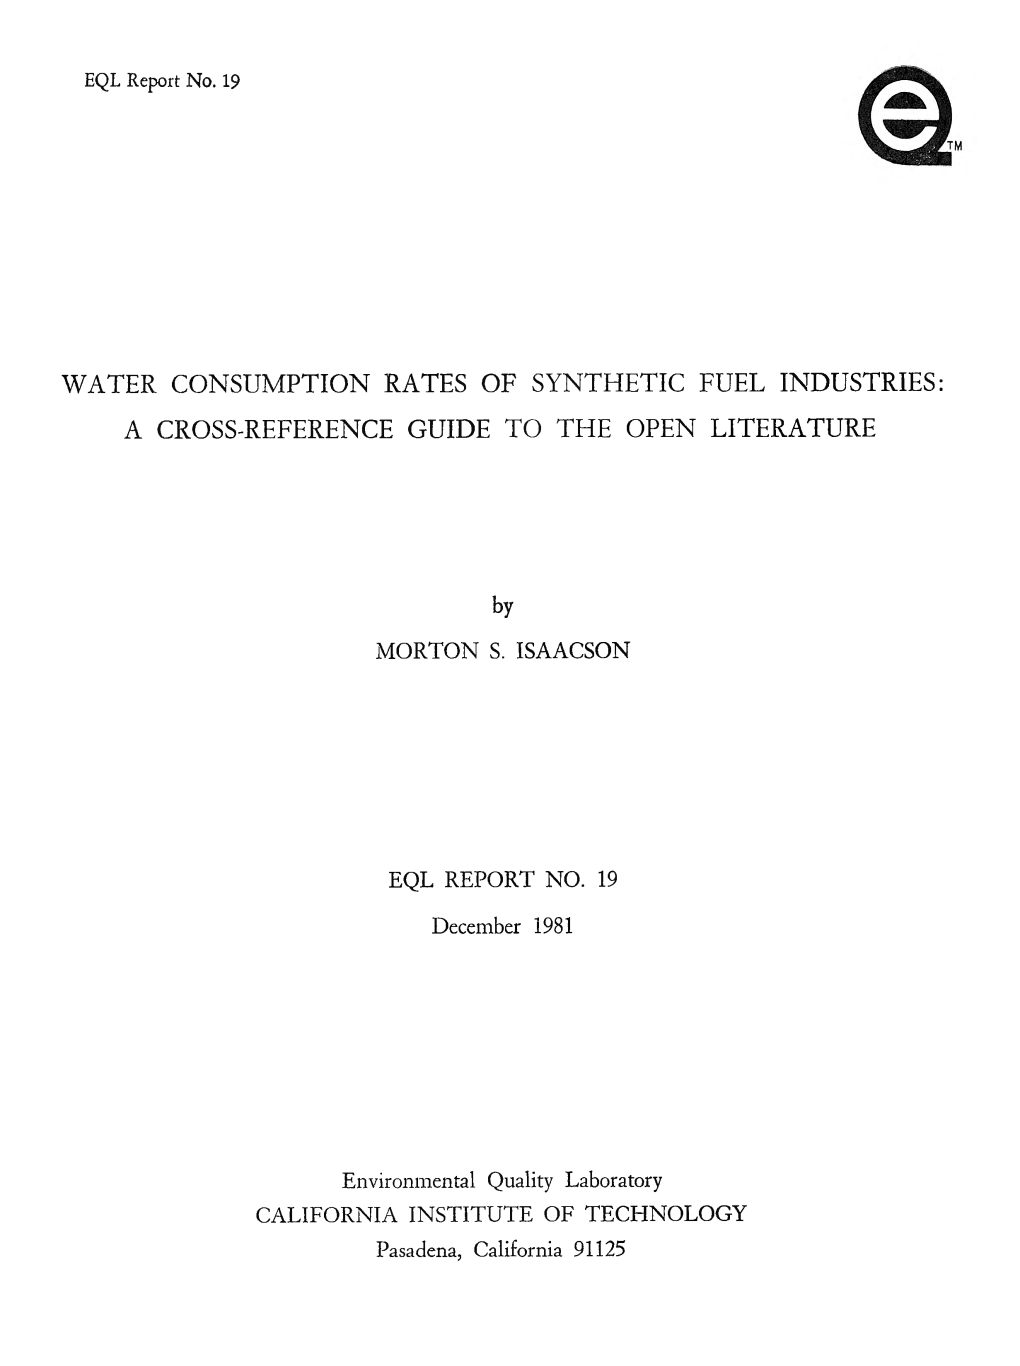 Water Consumption Rates of Synthetic Fuel Industries: a Cross-Reference Guide to the Open Literature